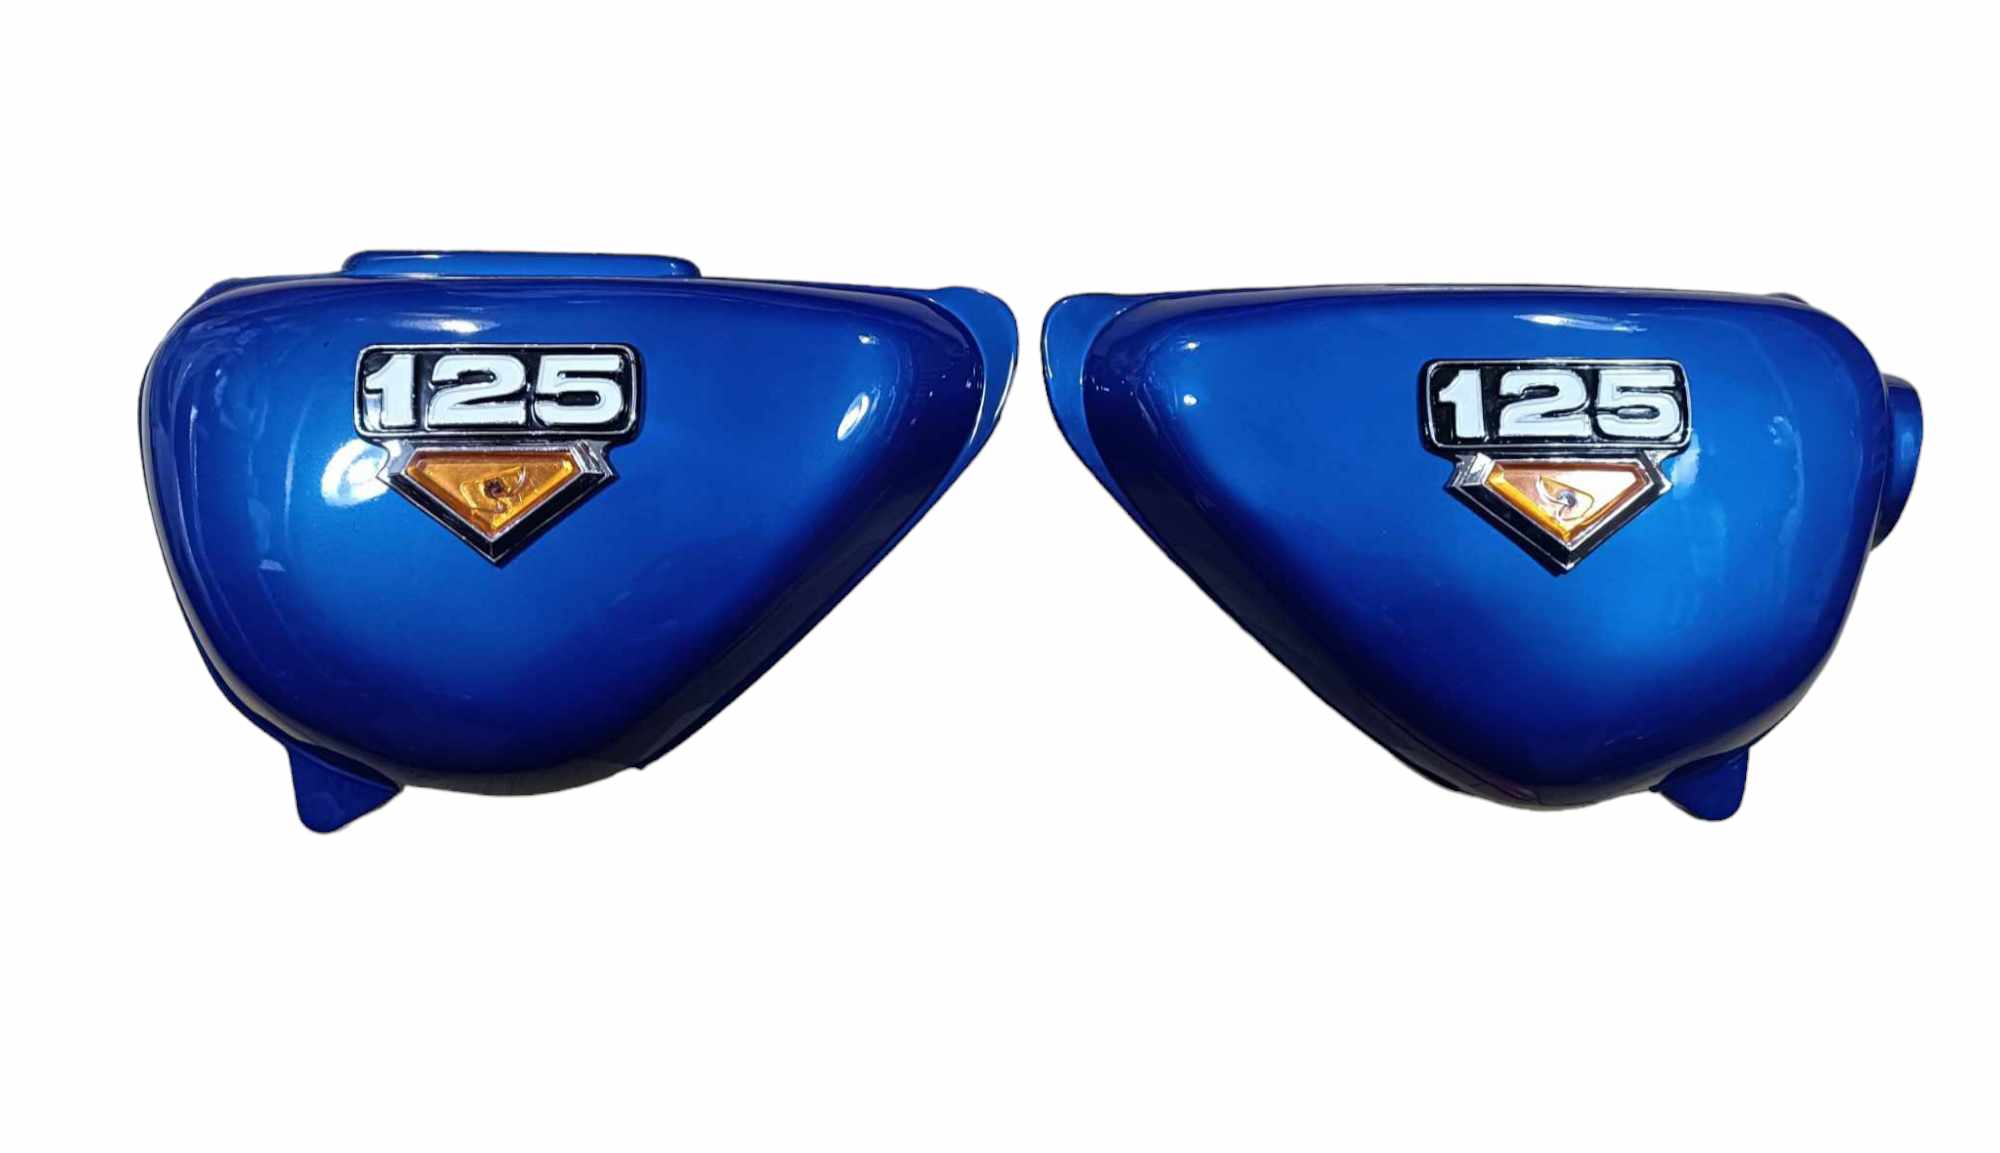 Honda CB125S CB100K3 Pair Of Motorcycle Side Panel Covers Left & Right In Blue